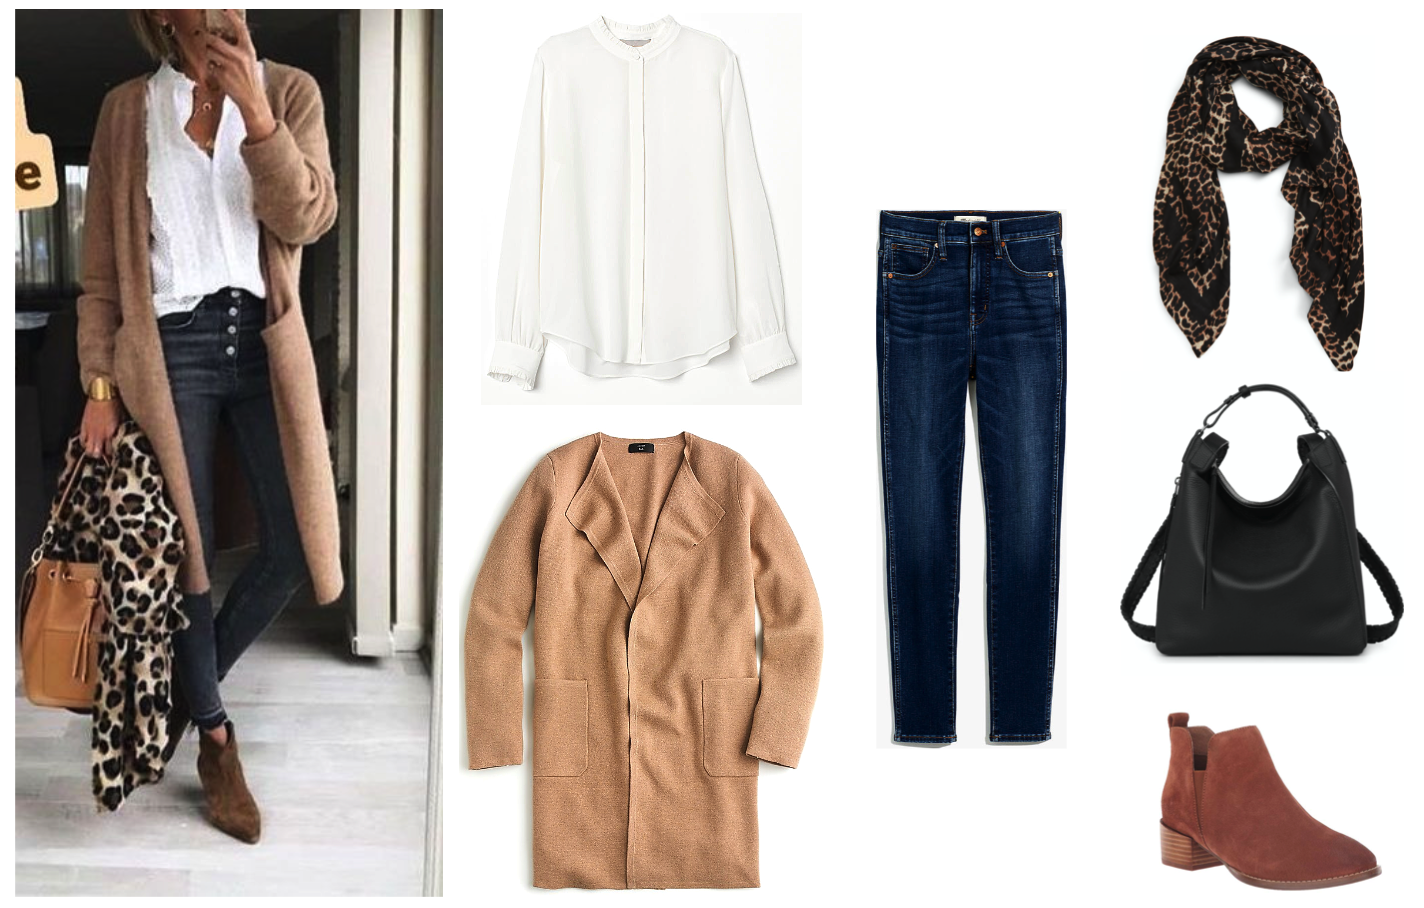 12 Must-Have Layered Outfits for Fall